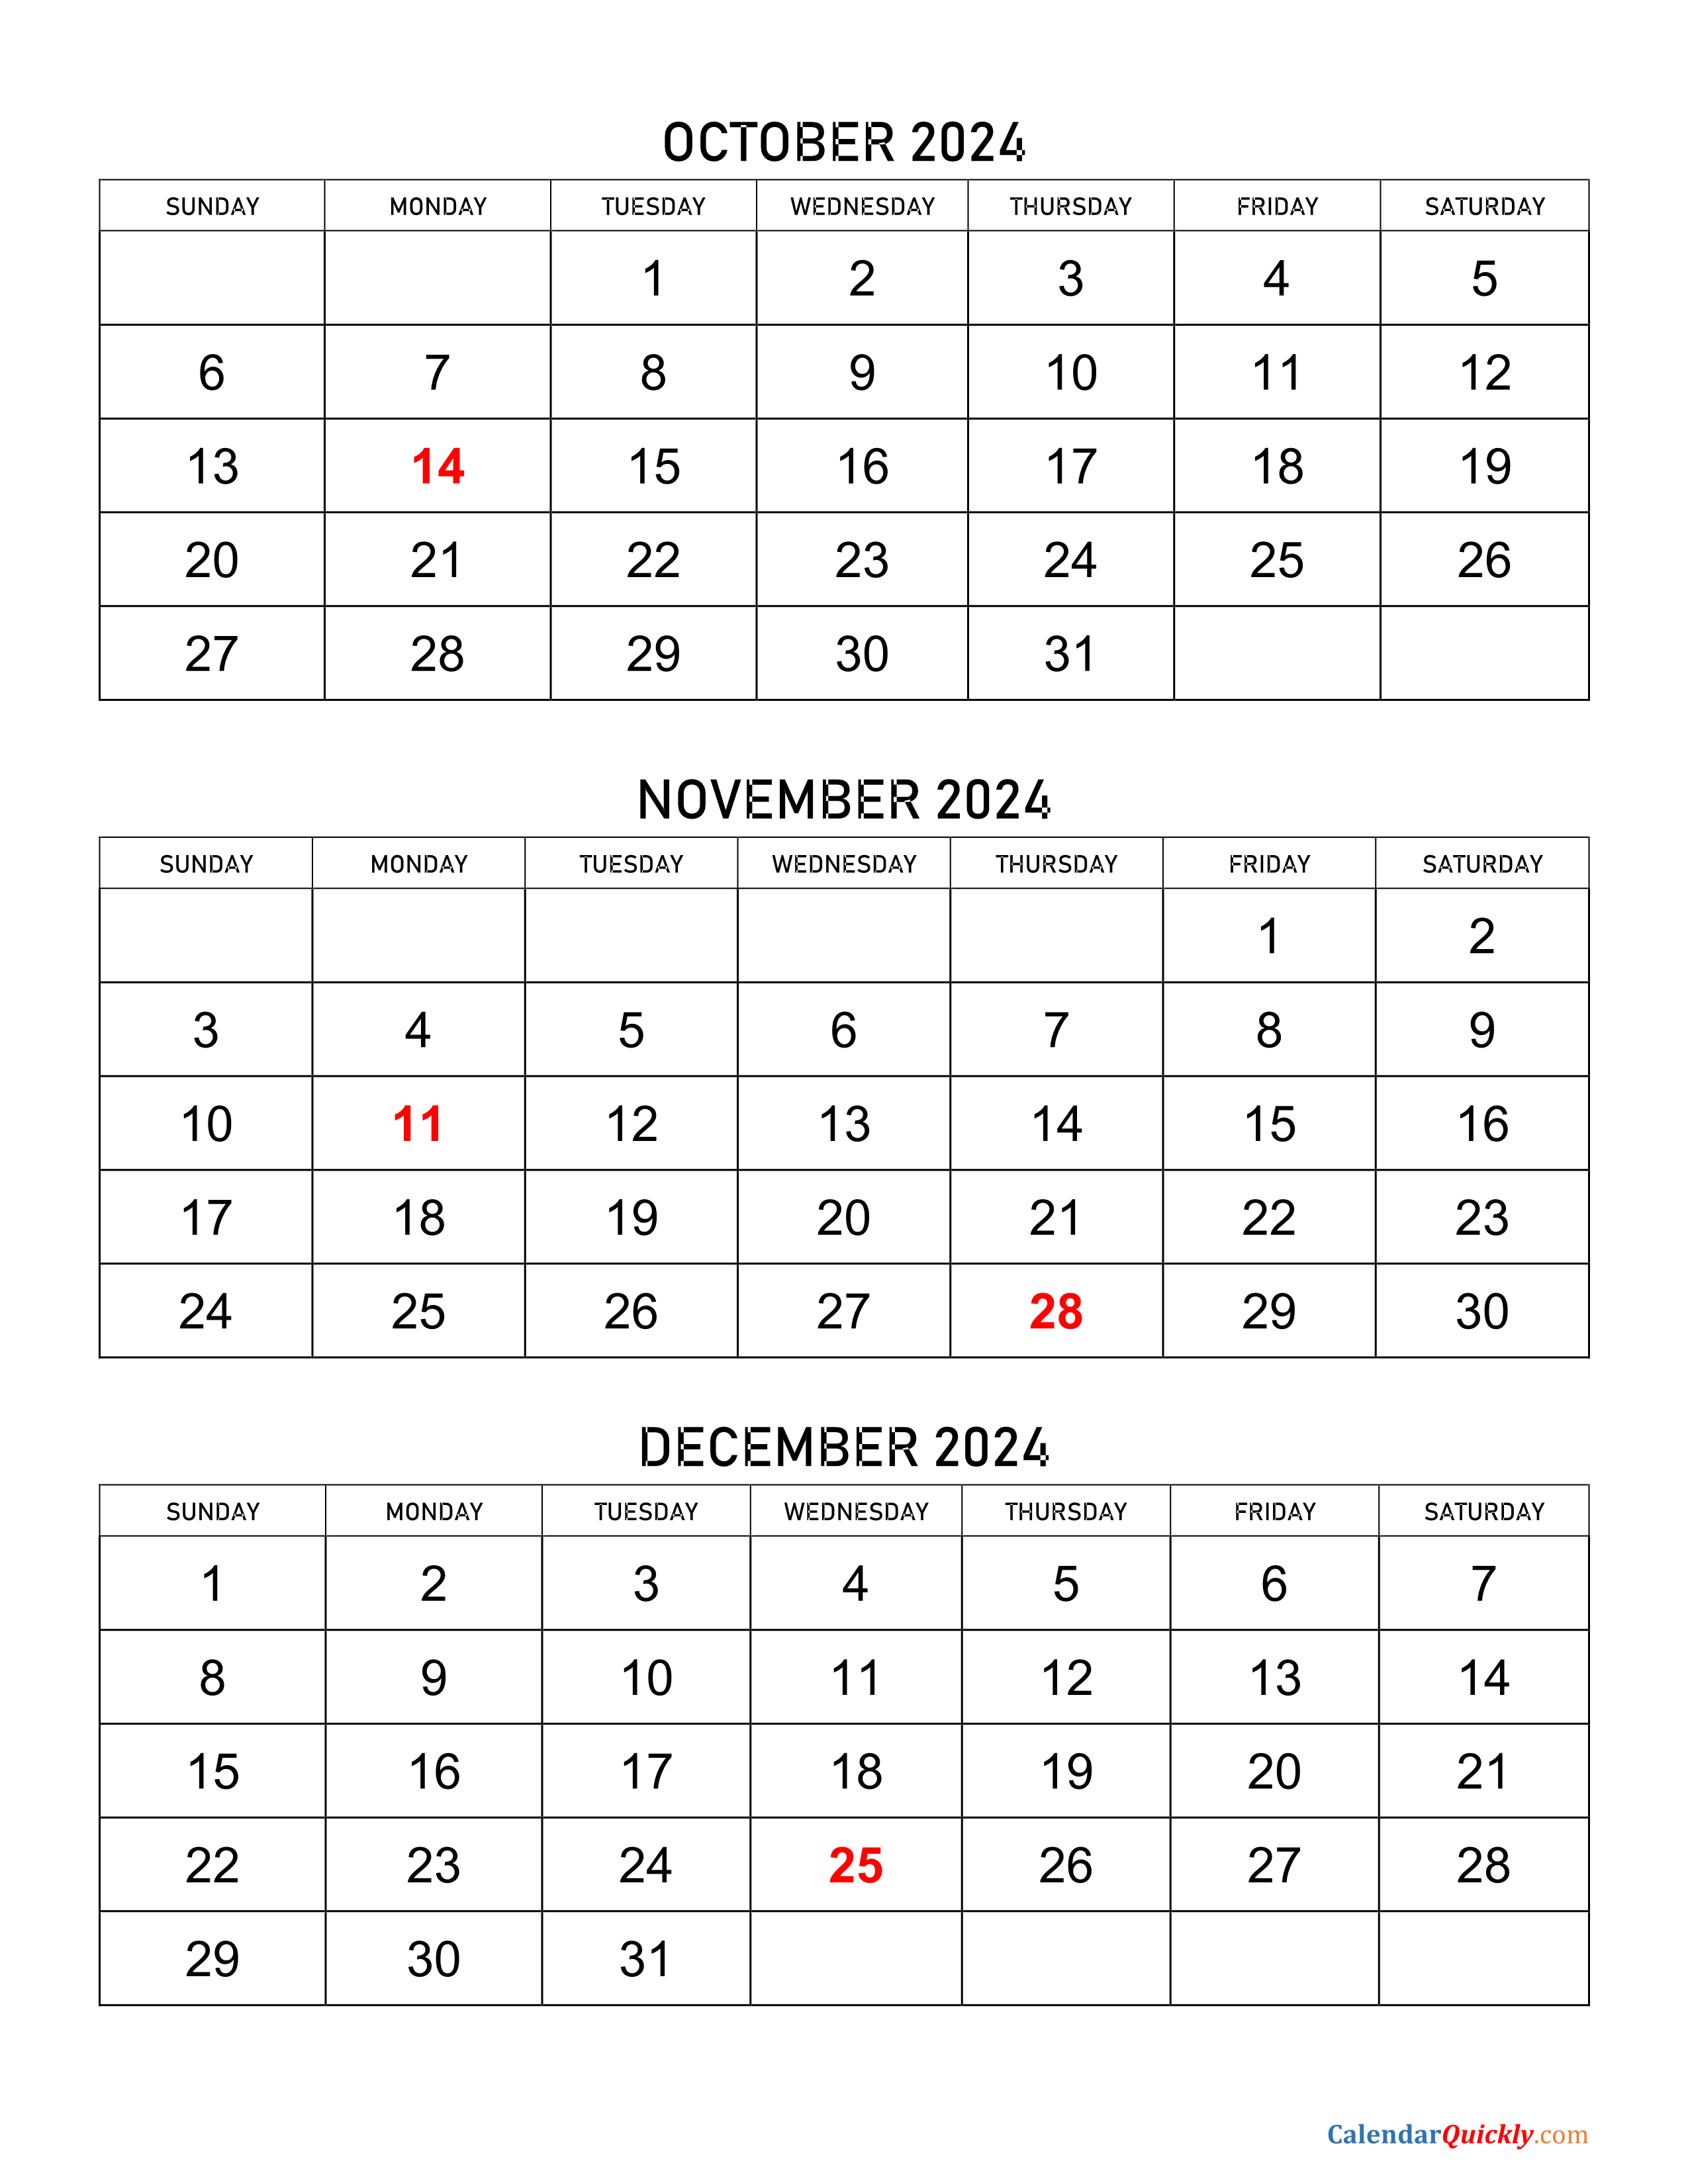 December Calendar 2024 Table Top The Best Incredible January 2024